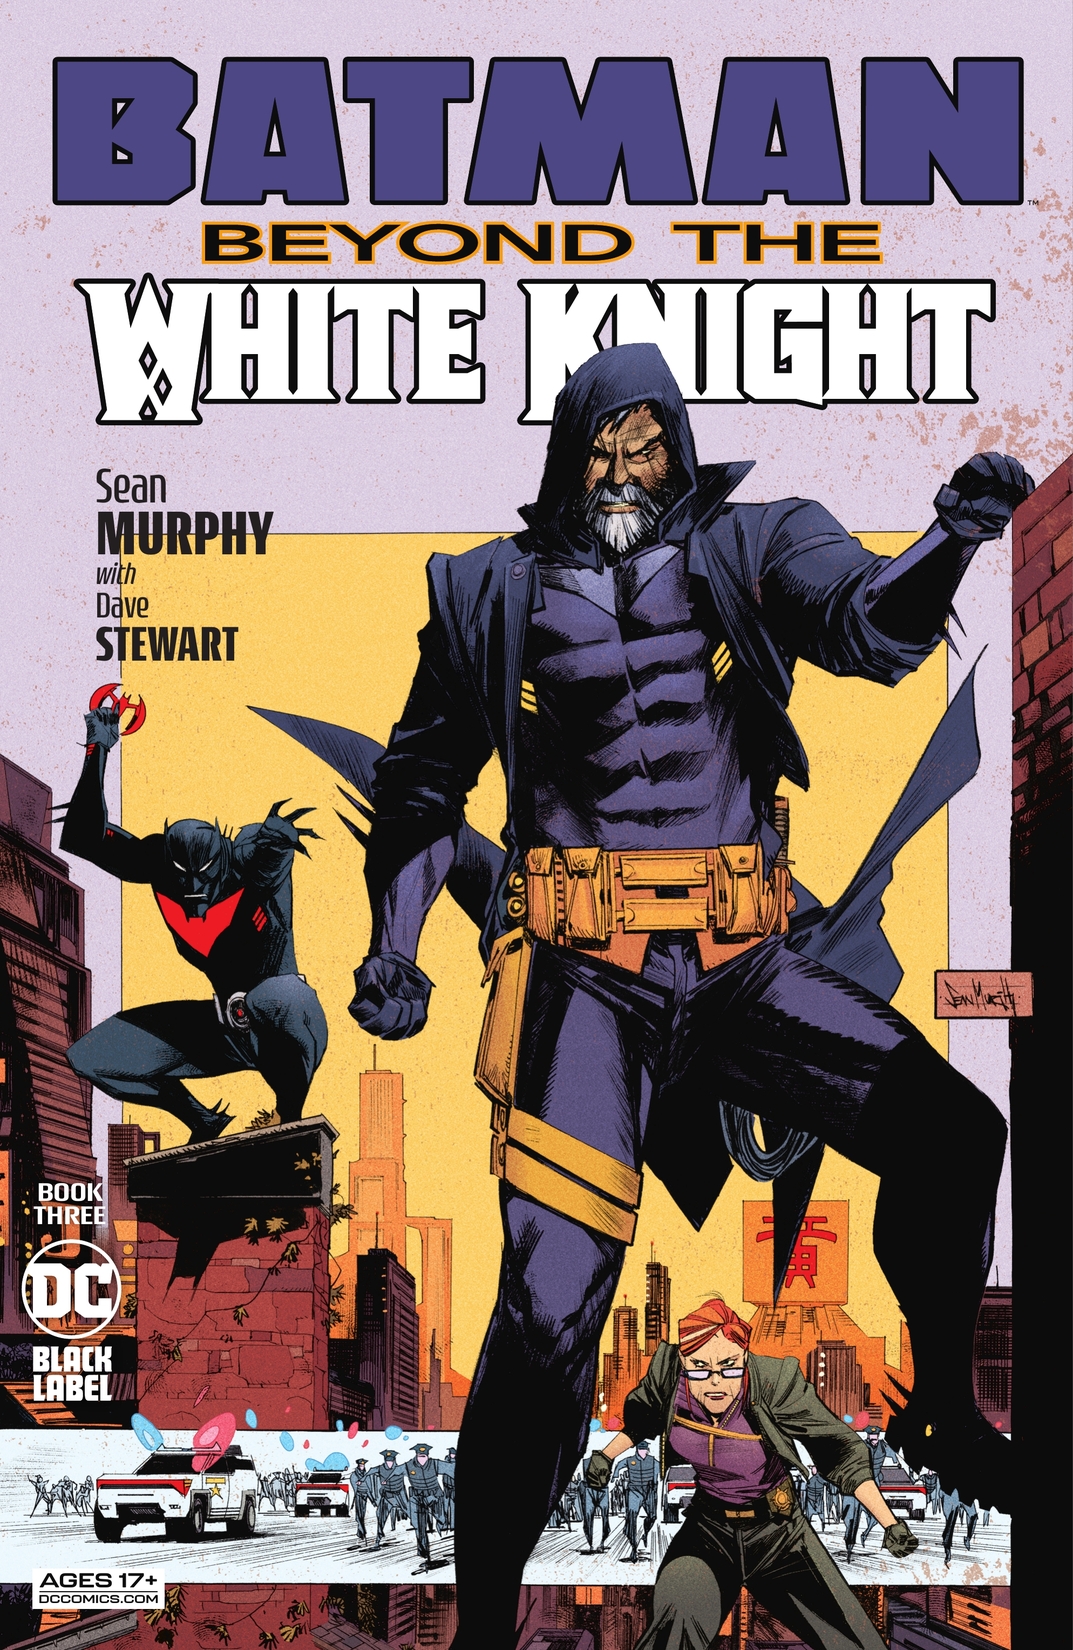 Batman: Beyond the White Knight #3 preview images